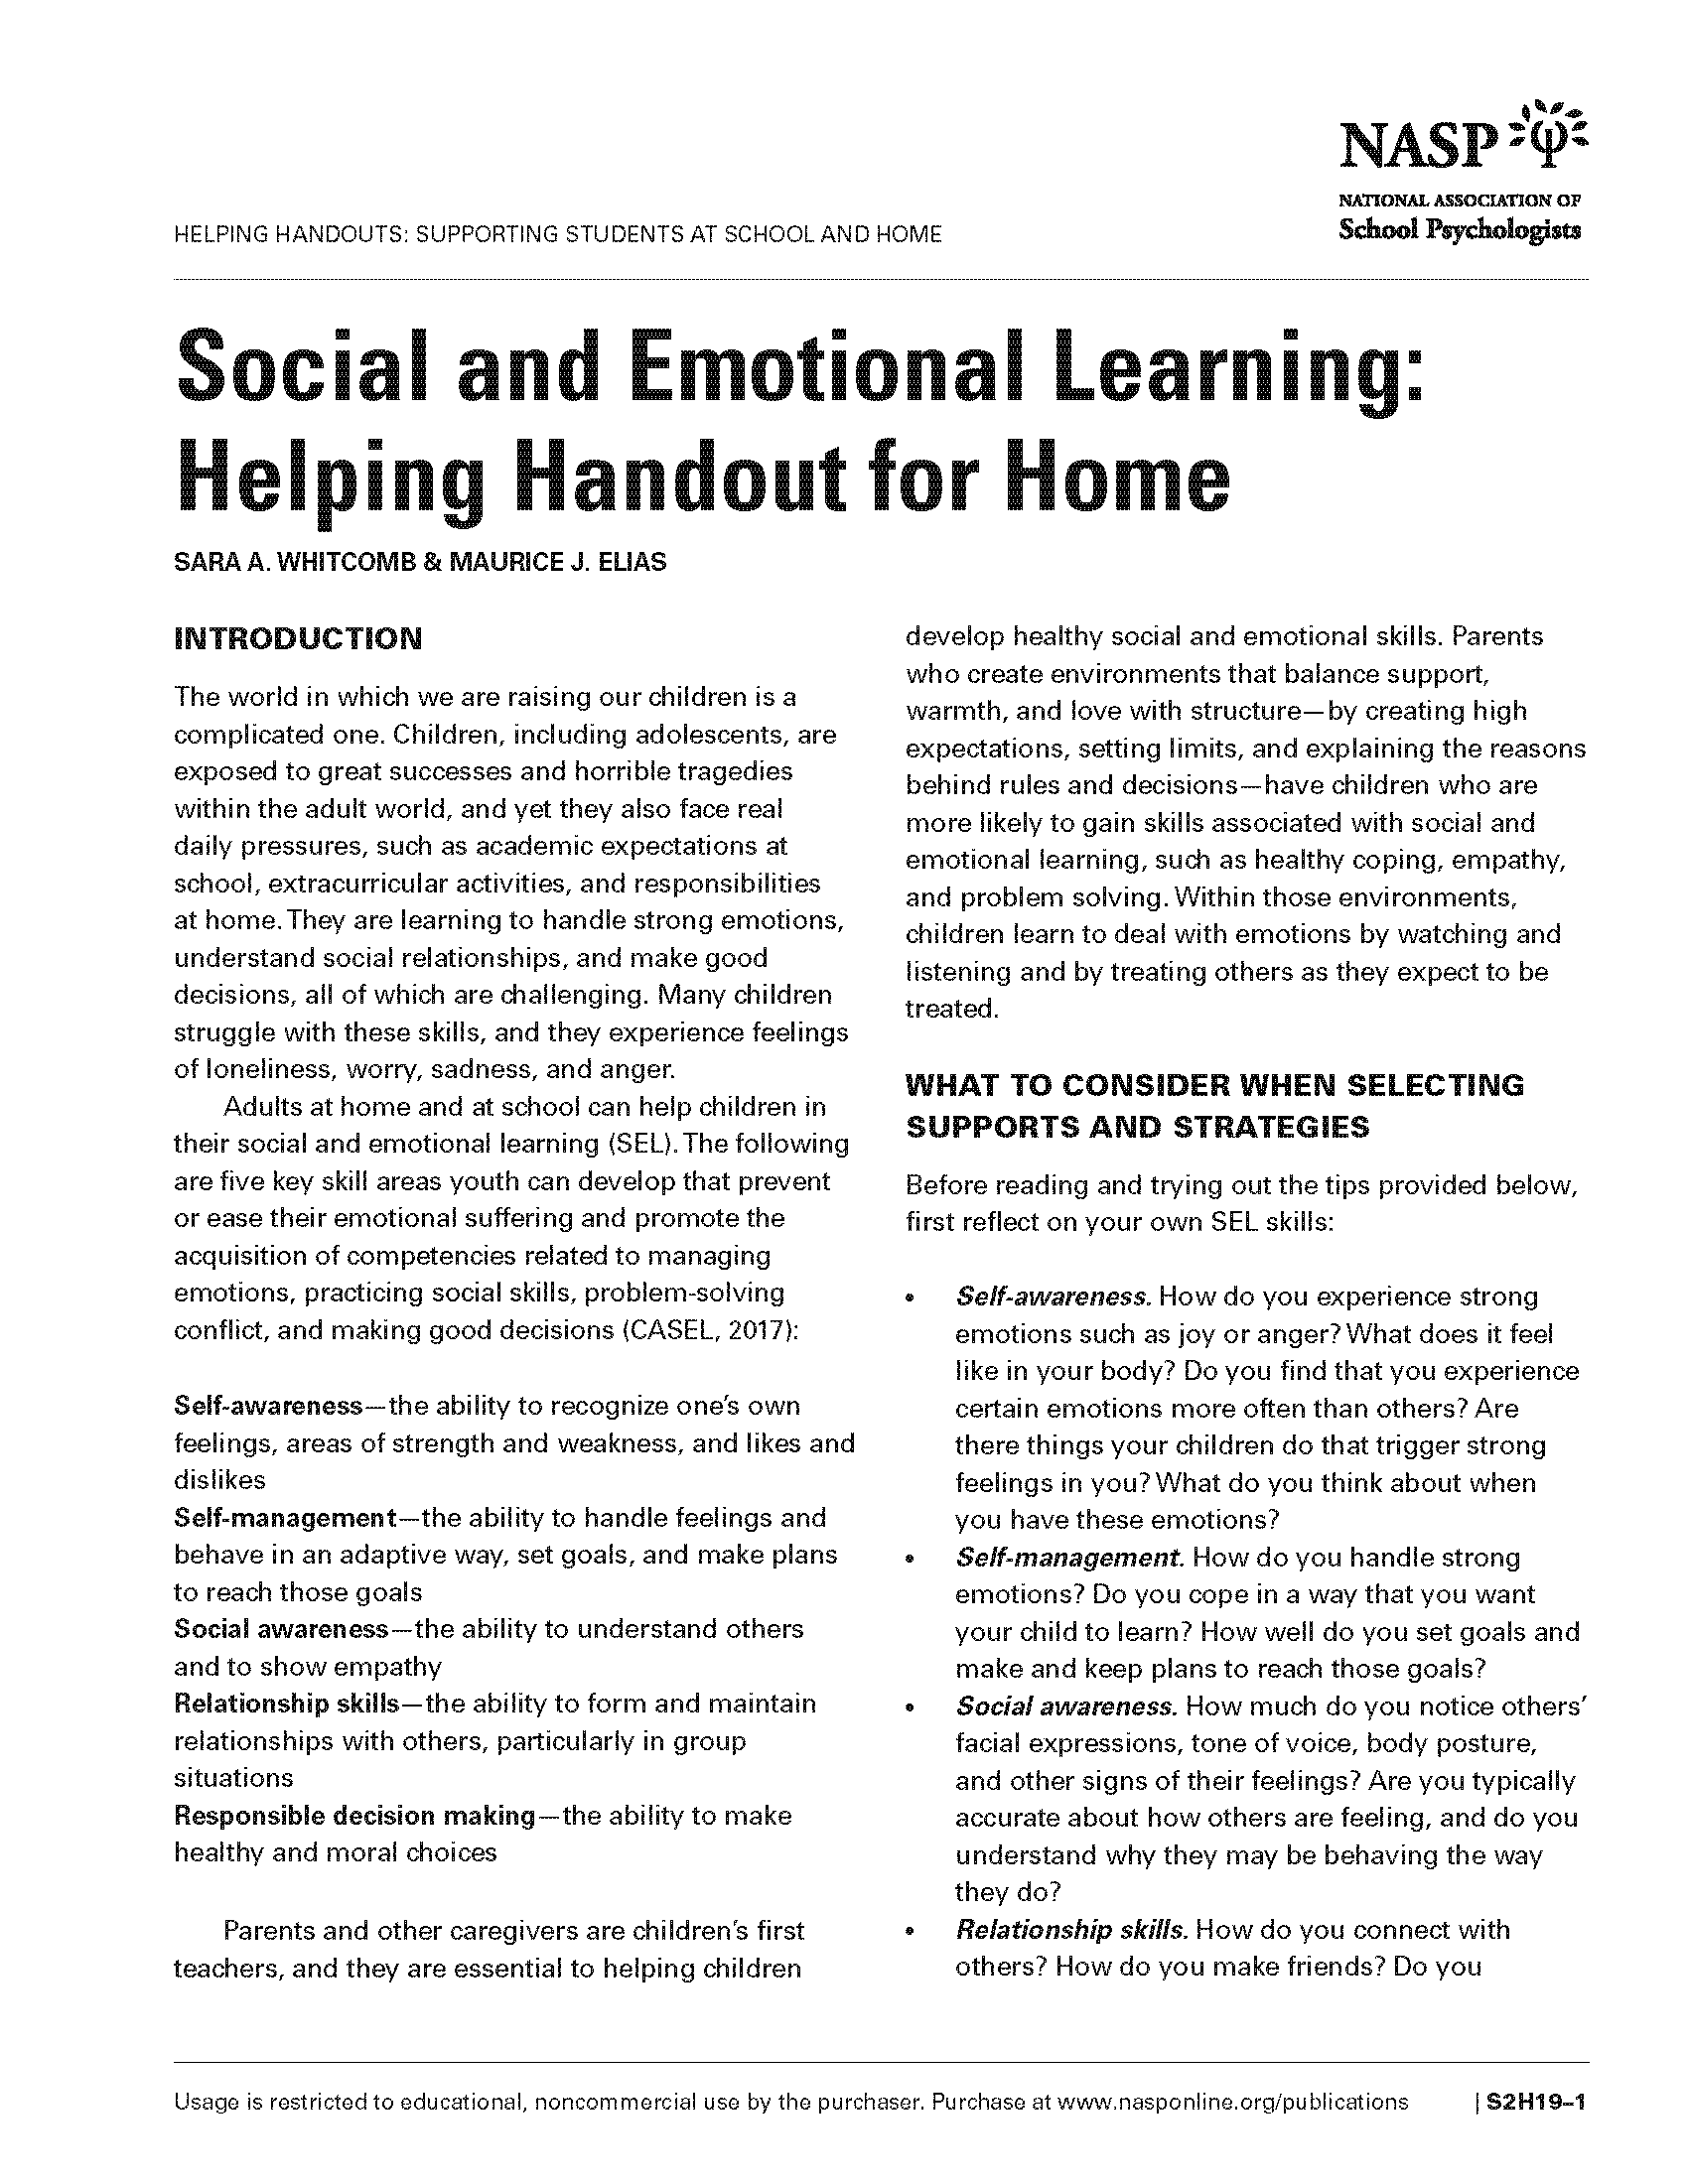 Social and Emotional Learning: Helping Handout for Home